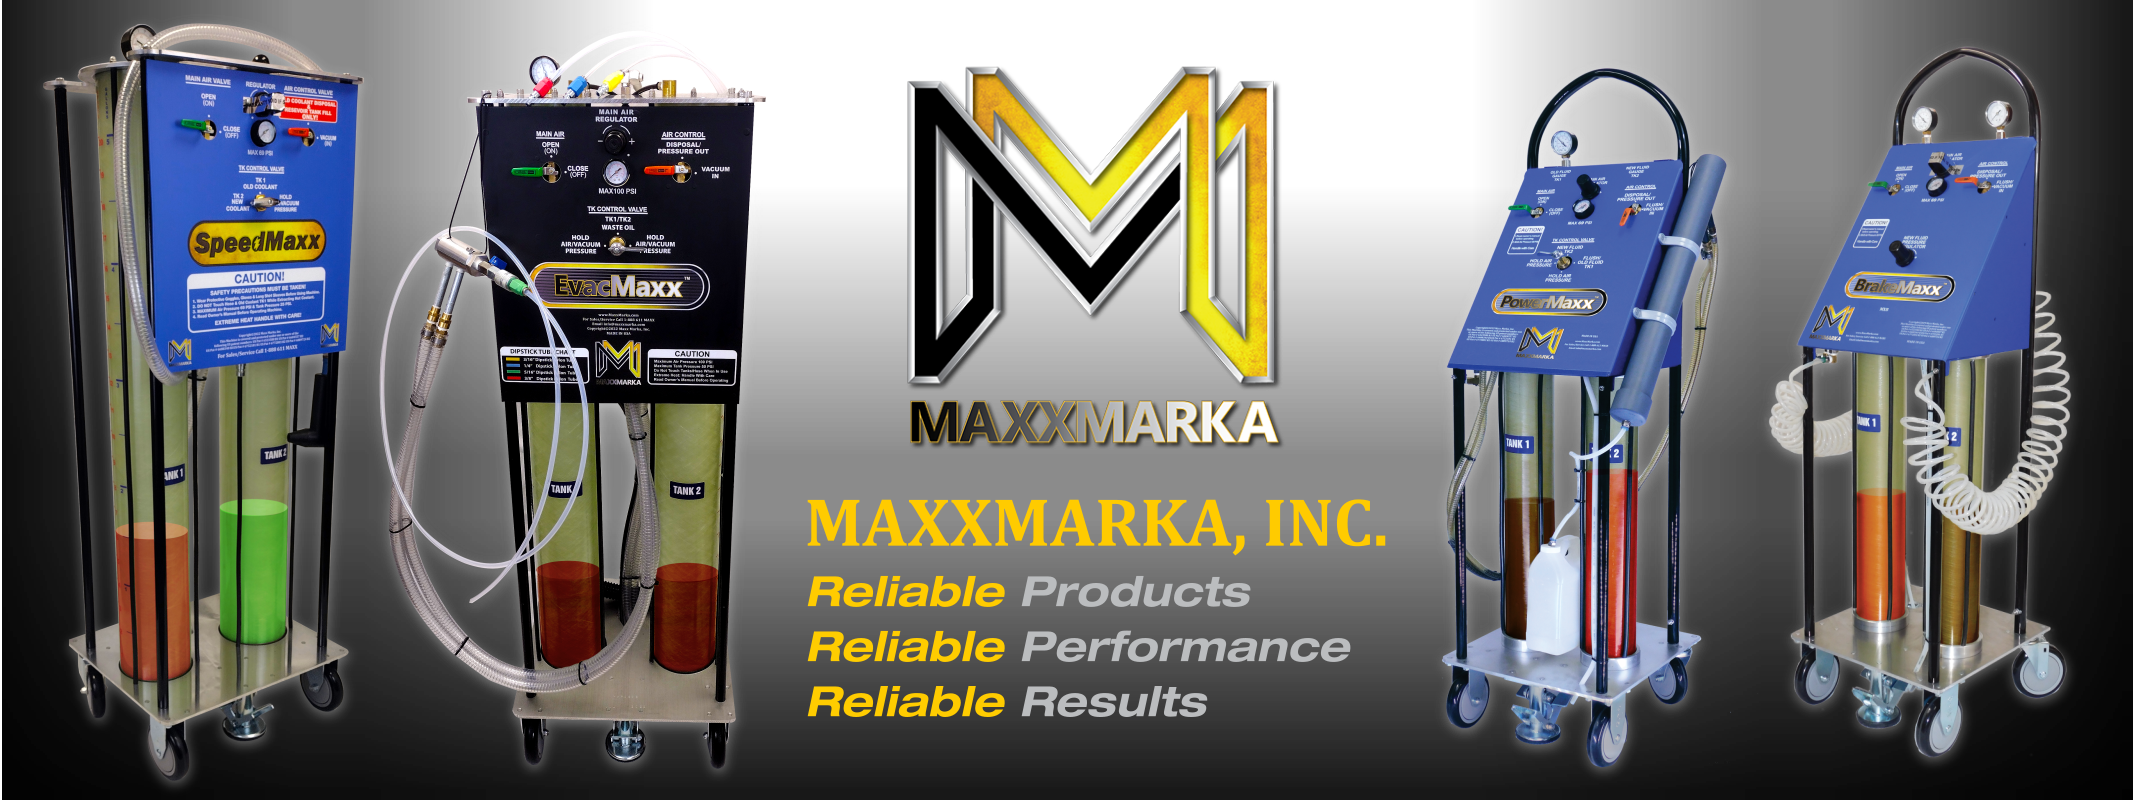 MaxxMarka, reliable products, reliable performance, reliable results